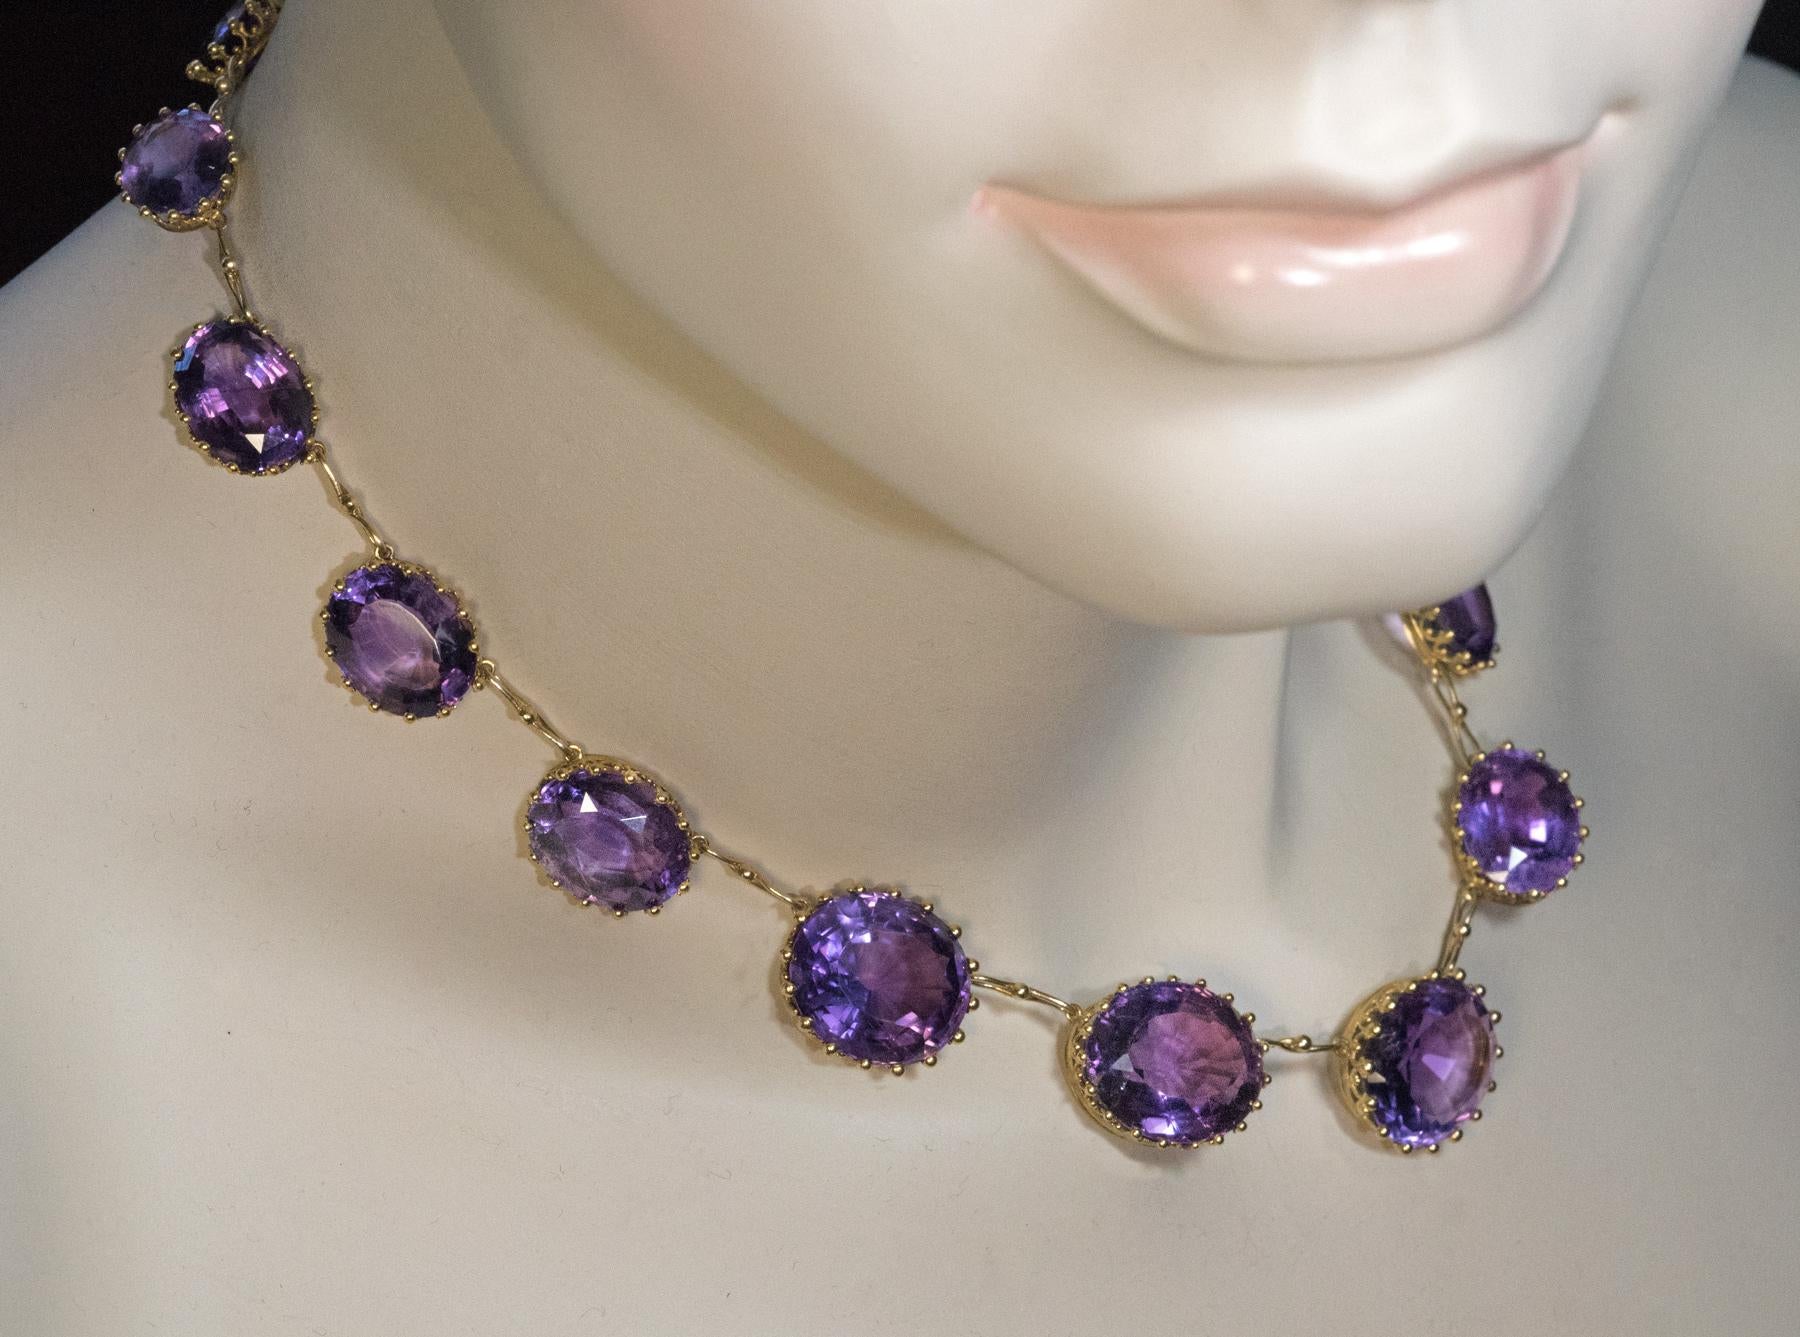 Circa 1890

This antique Victorian era 14K yellow gold necklace features graduating oval cut medium purple amethysts set in royal crown style gold heads.

Length 38 cm (15 in.)